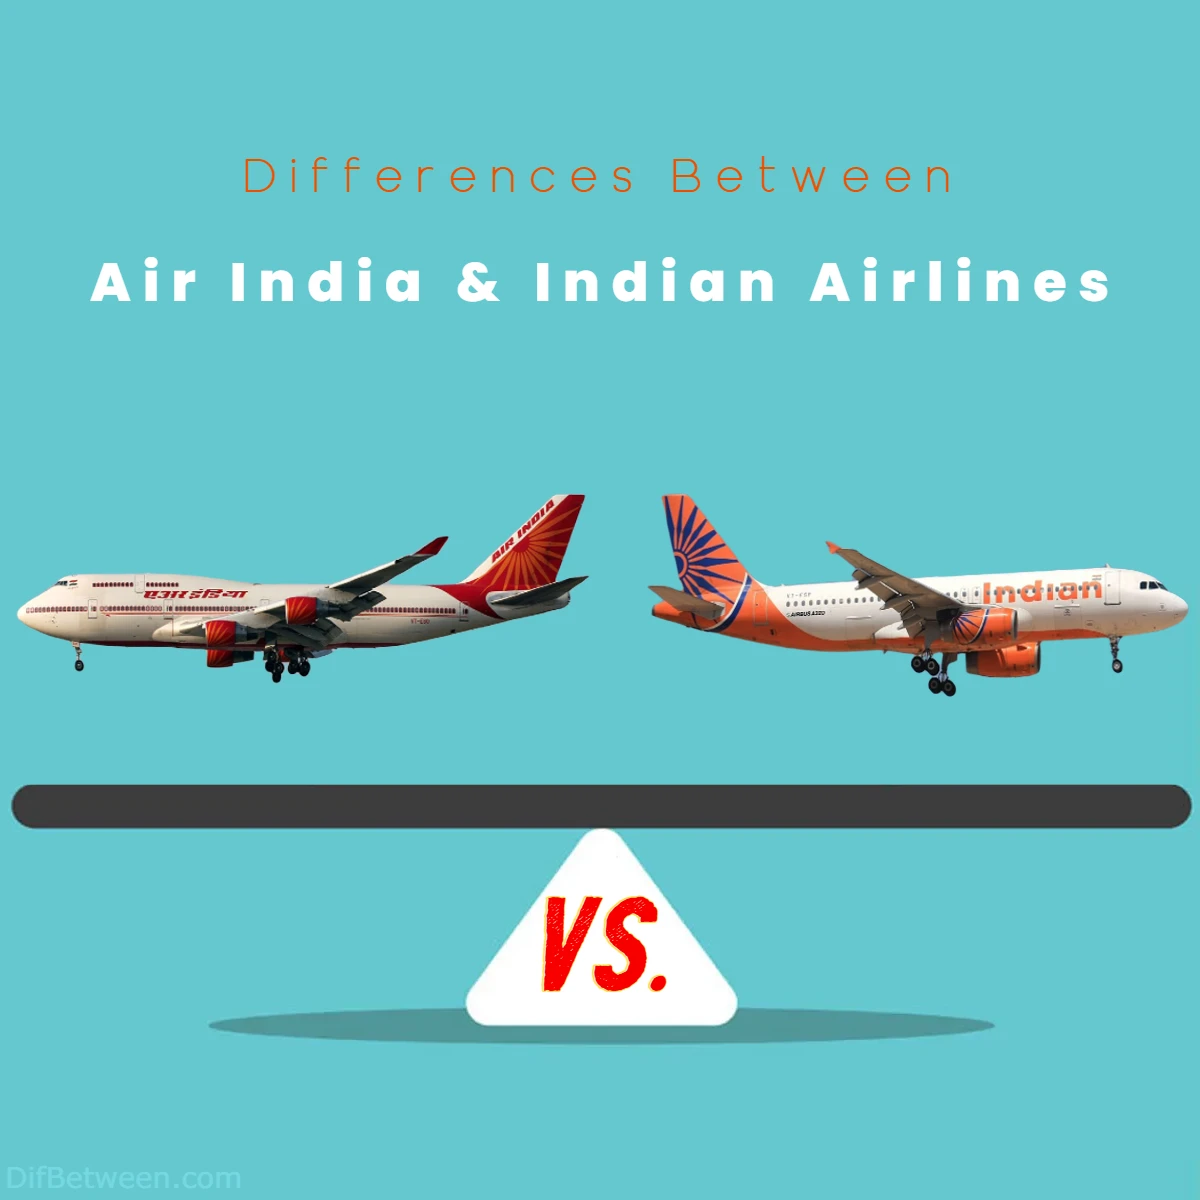 Differences Between Air India vs Indian Airlines